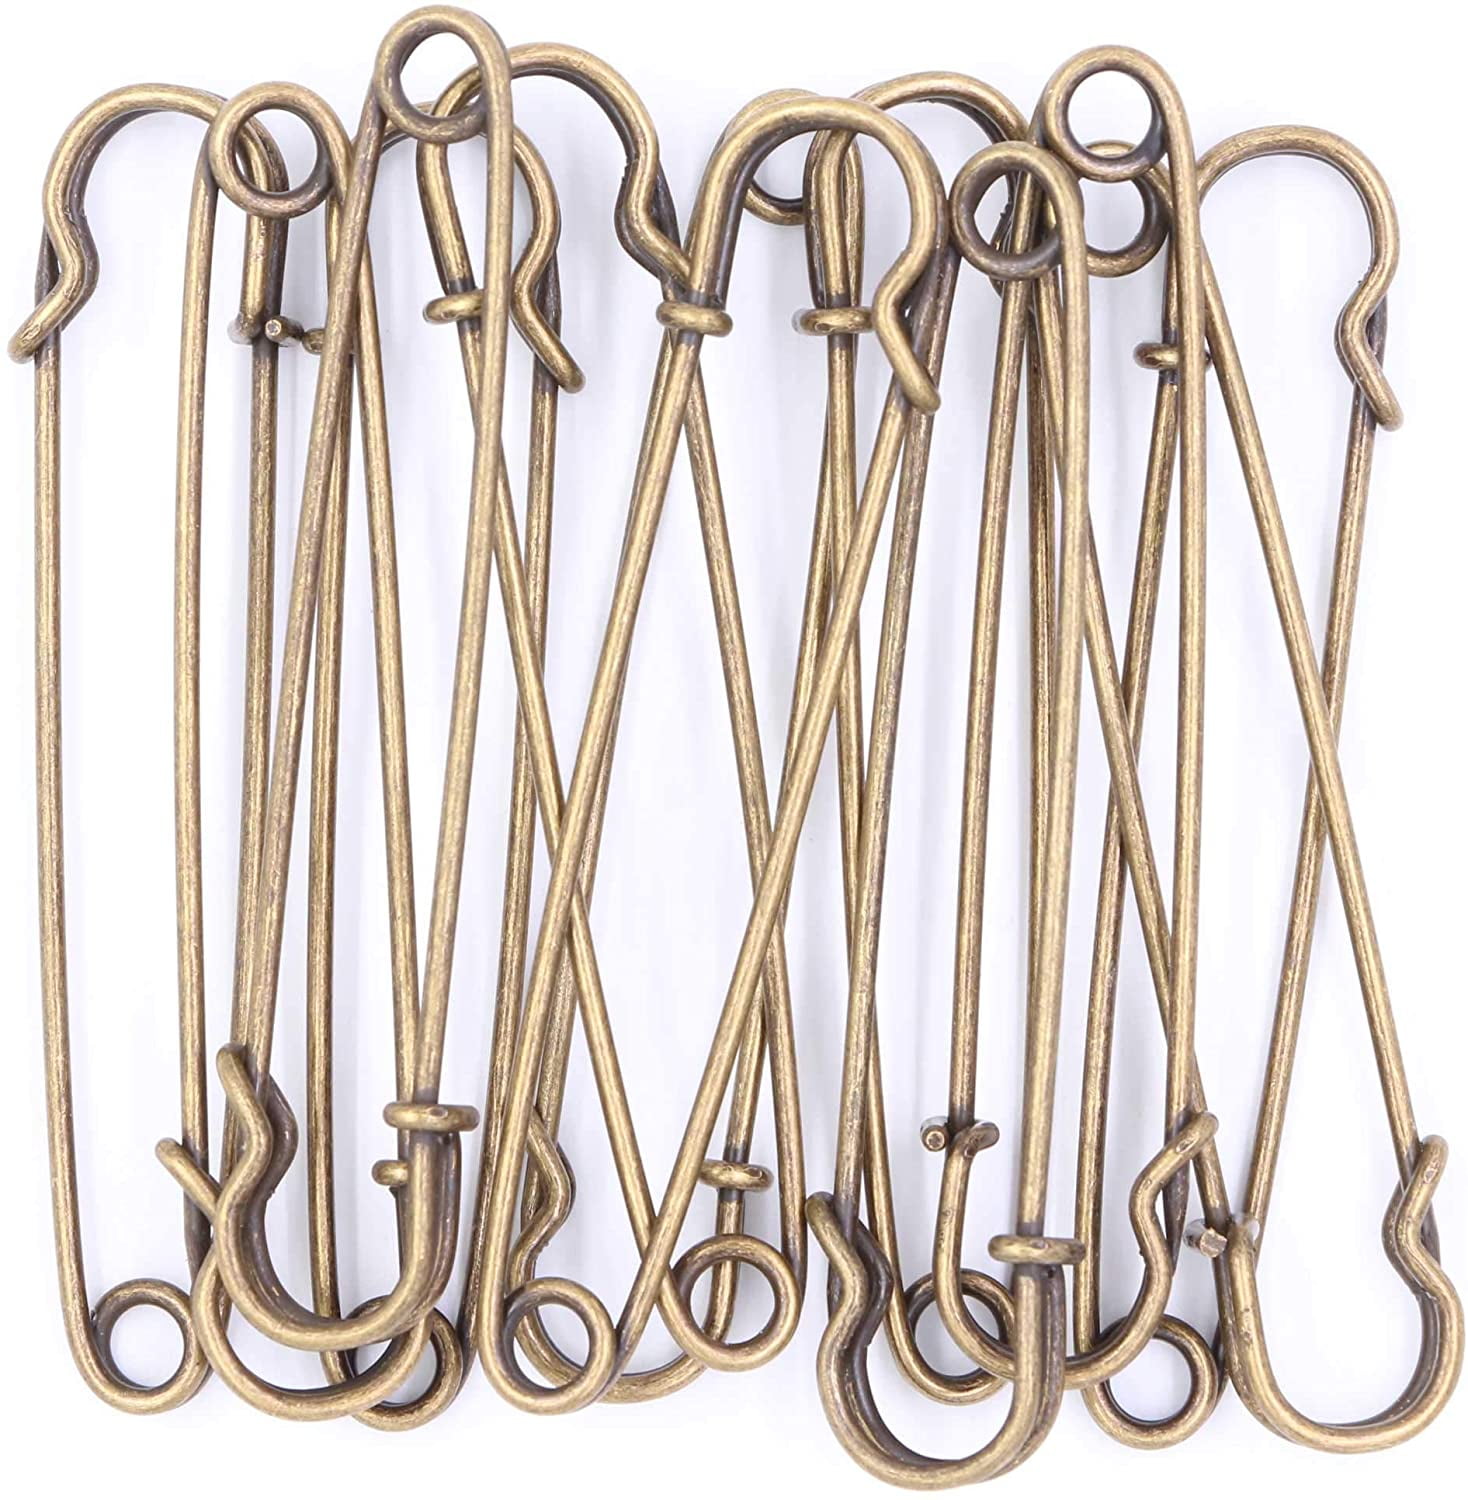 7pcs Safety Pins Extra Large Pins Stainless Steel Clasp For Scarf Blankets  Skirts Kilts Knitted Fabric Crafts - Pins & Pincushions - AliExpress